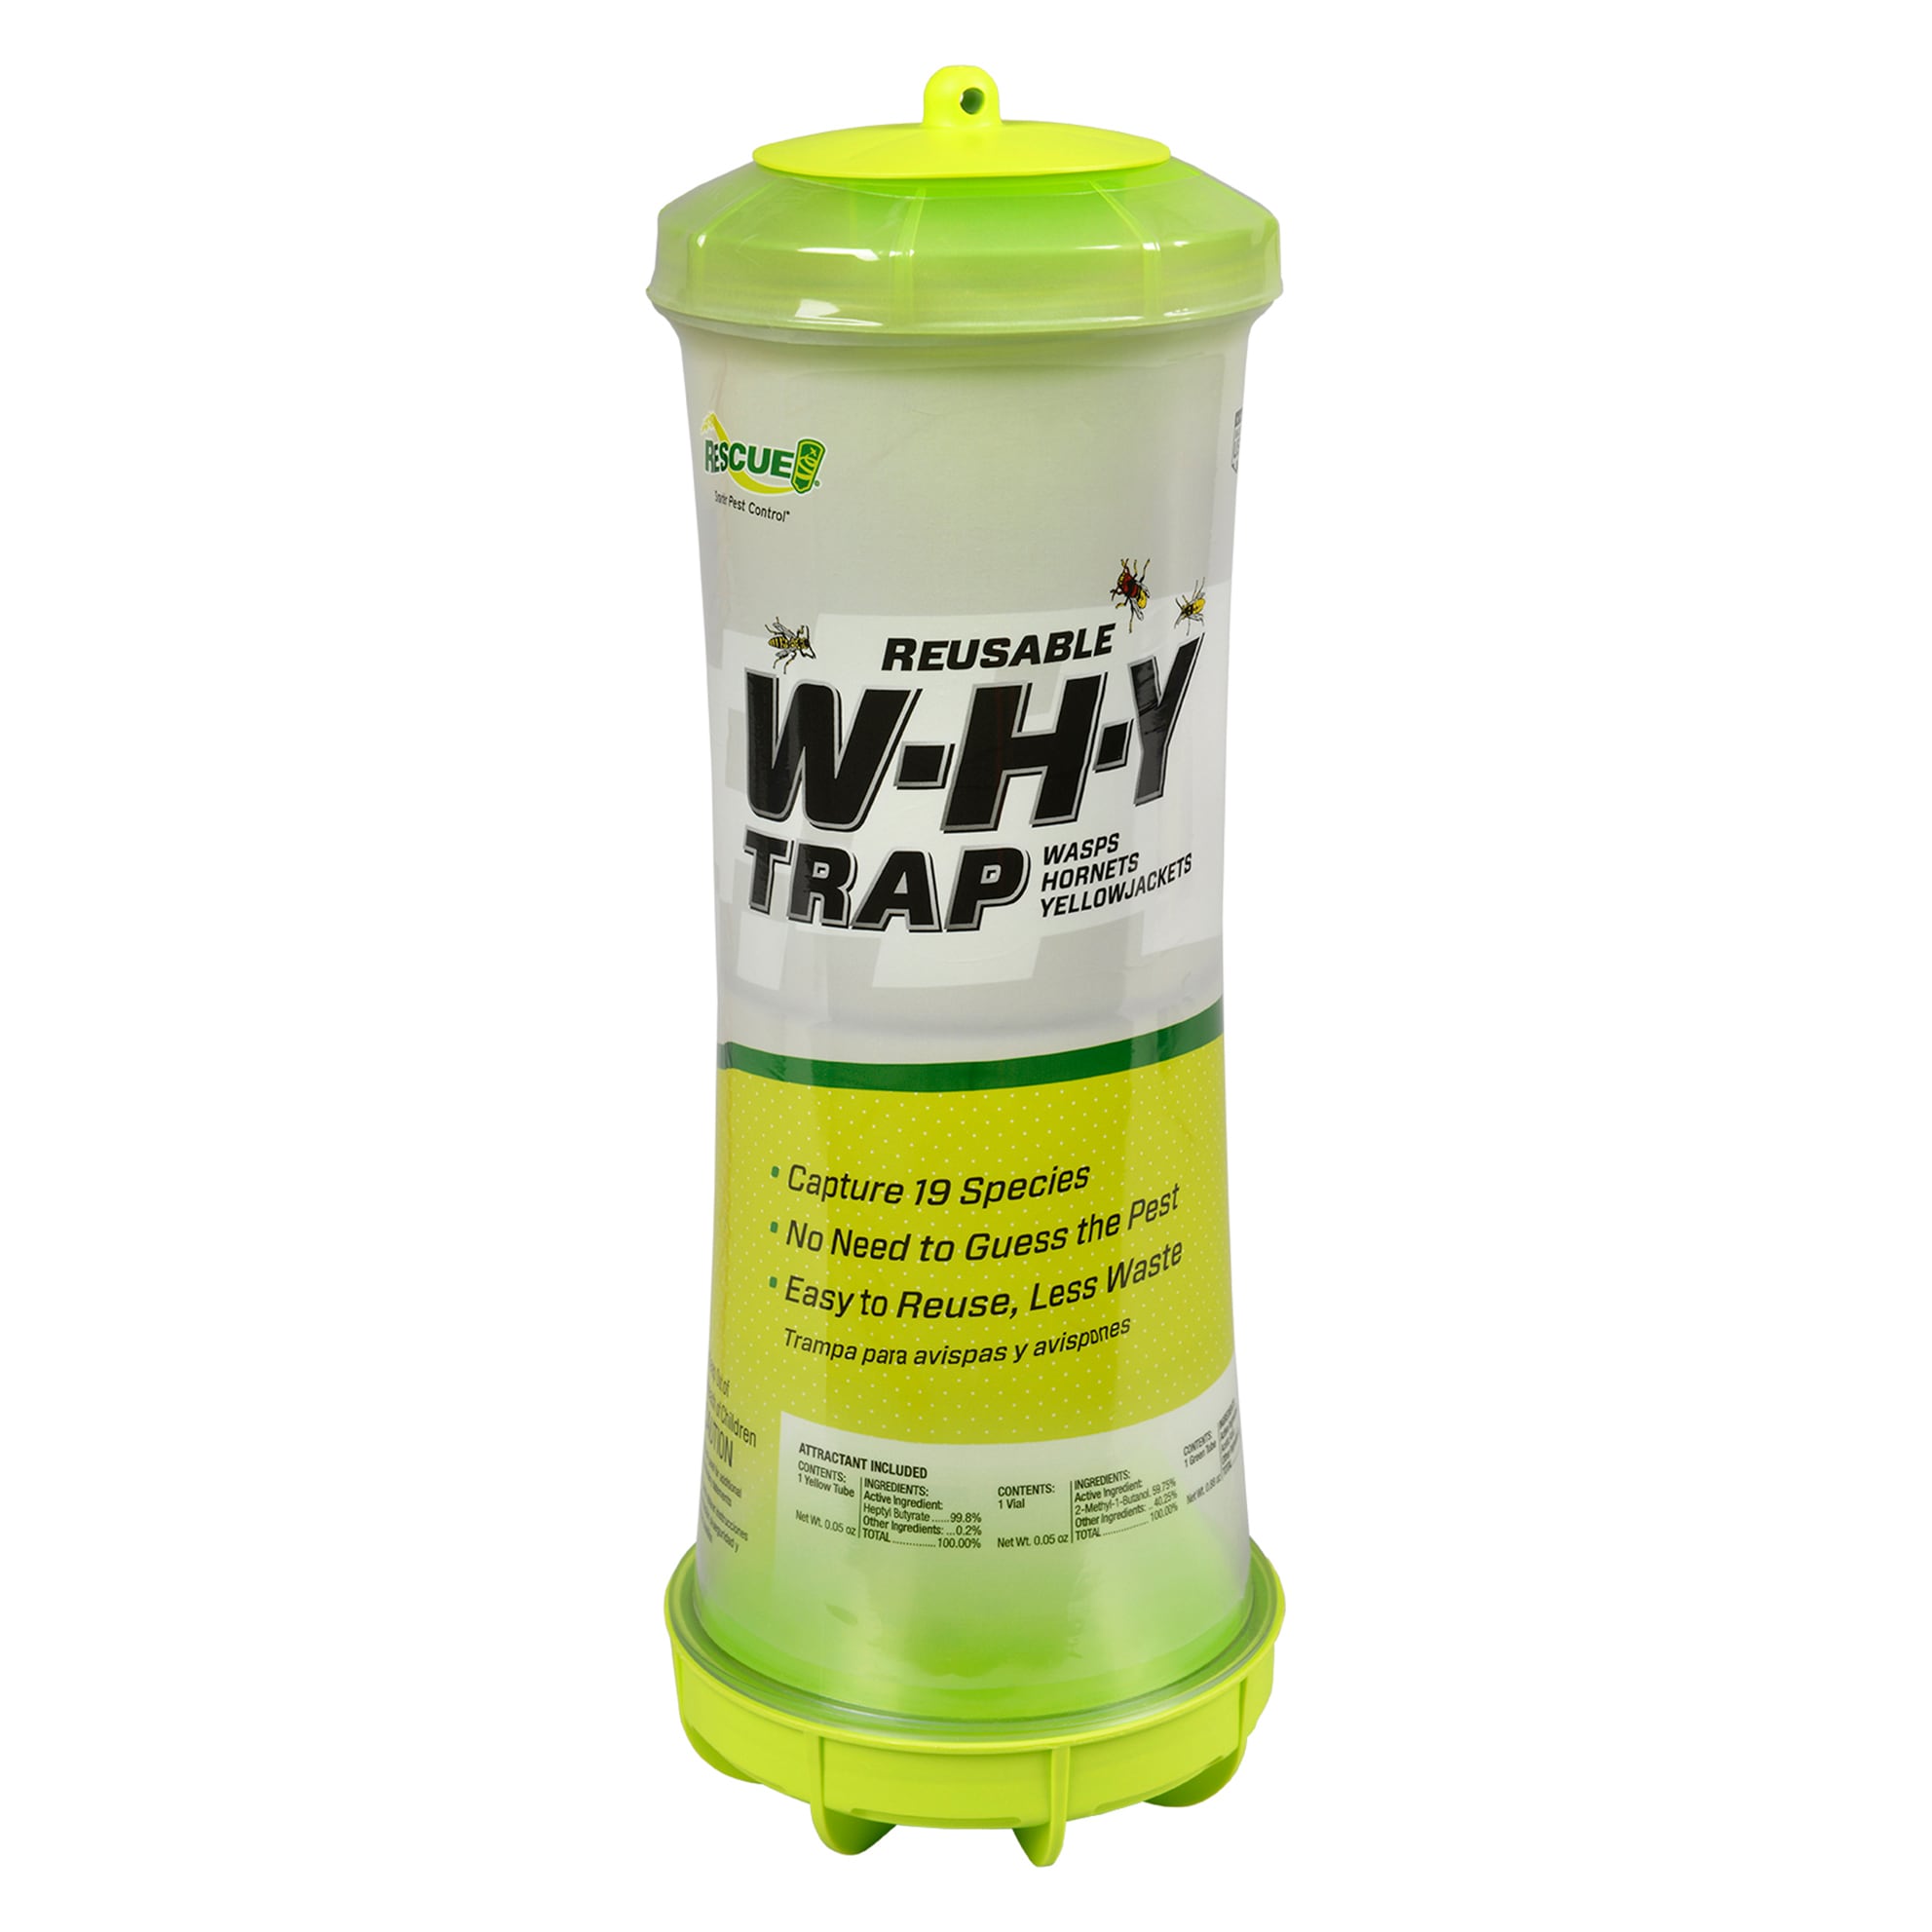 TERRO Outdoor Reusable Wasp and Fly Trap Bait Refill, 14 oz